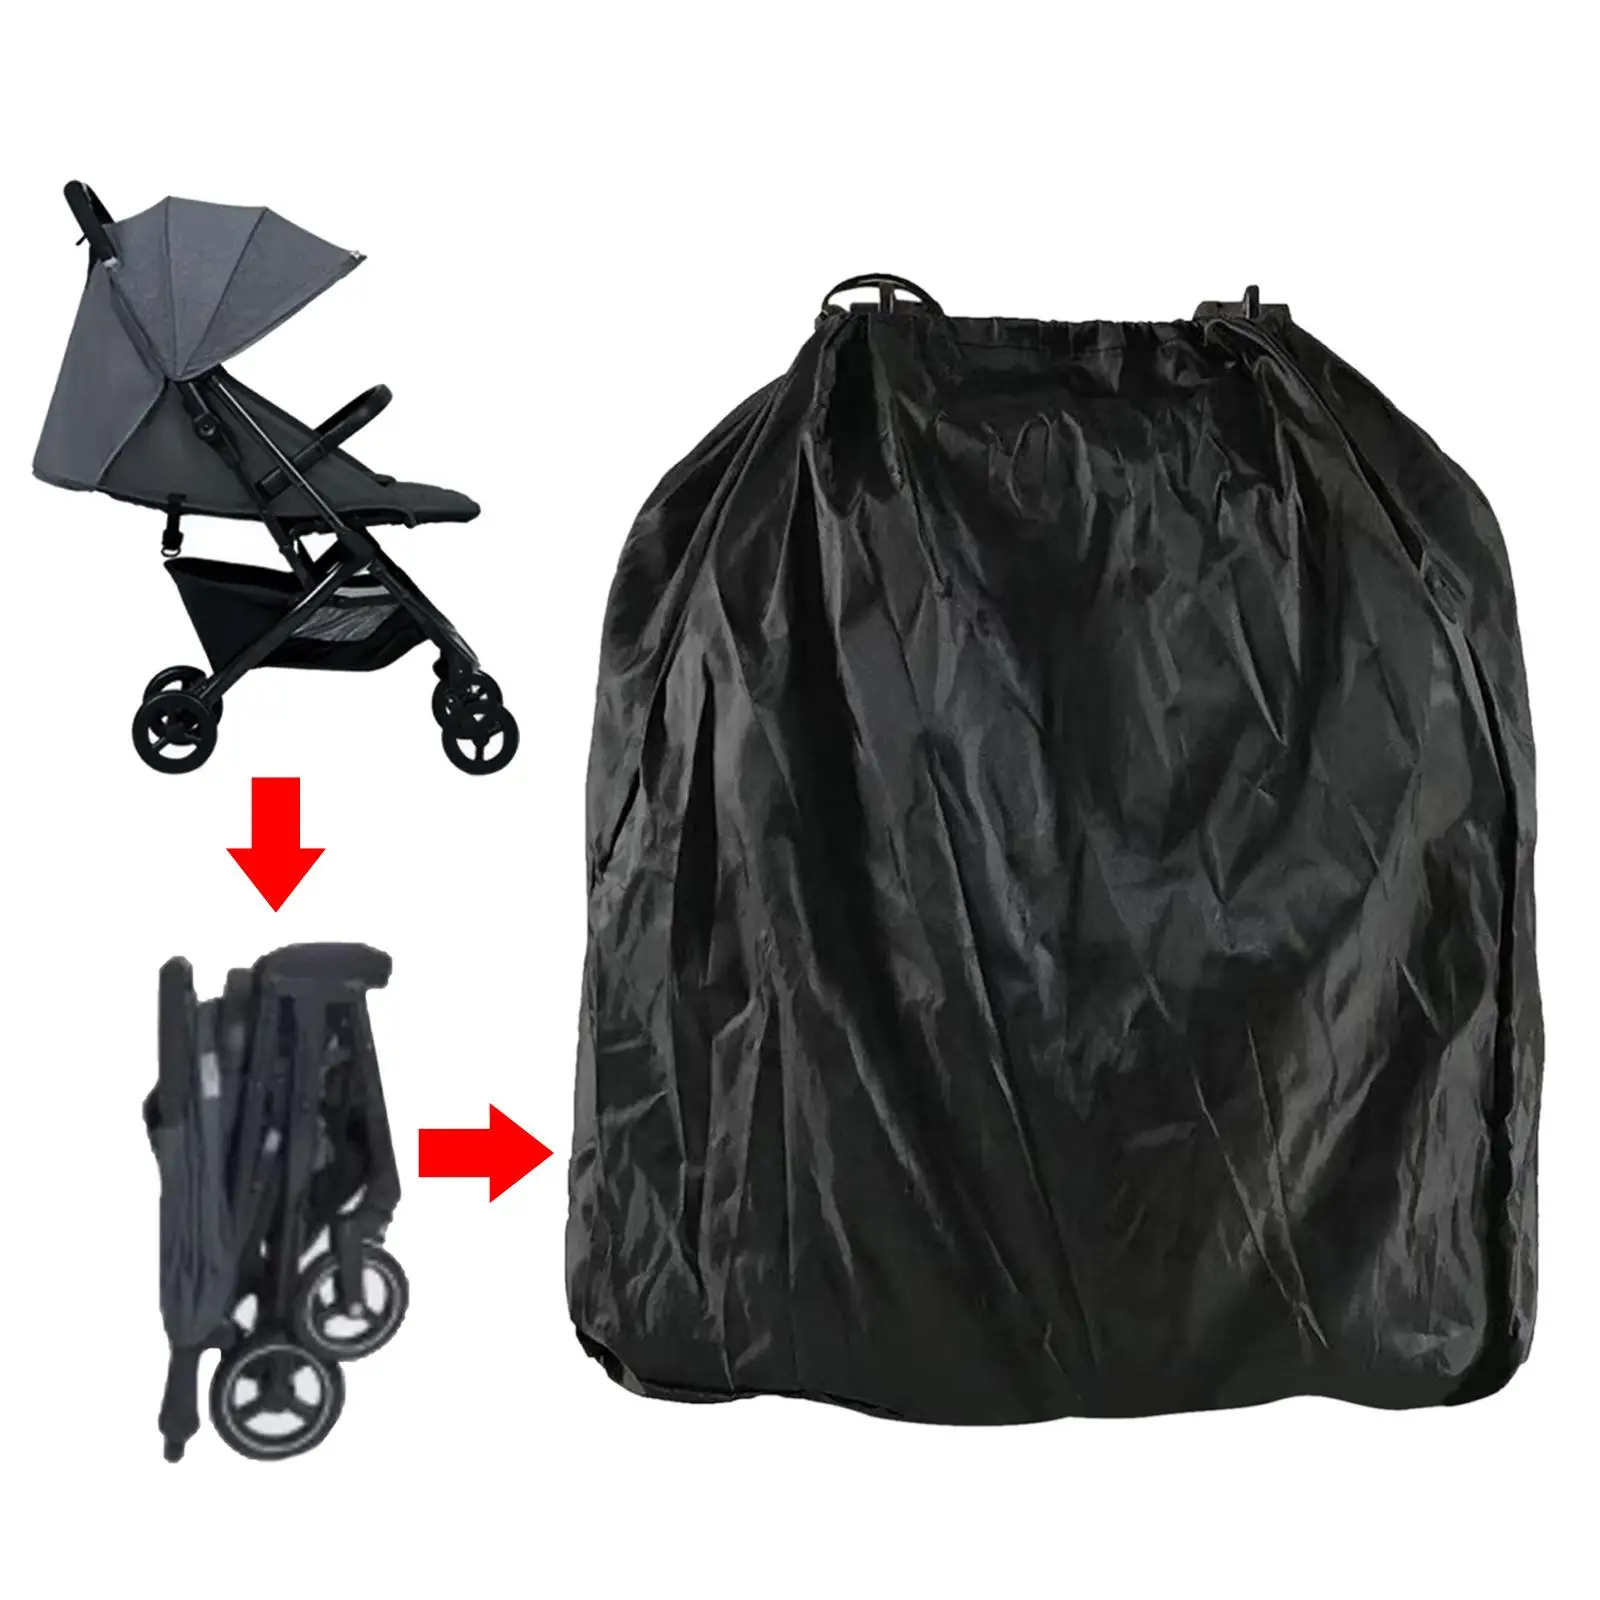 Air Travel Stroller Bag Sturdy Waterproof Dustproof Durable Umbrella Stroller Travel Bag Large for Gate Check Airports